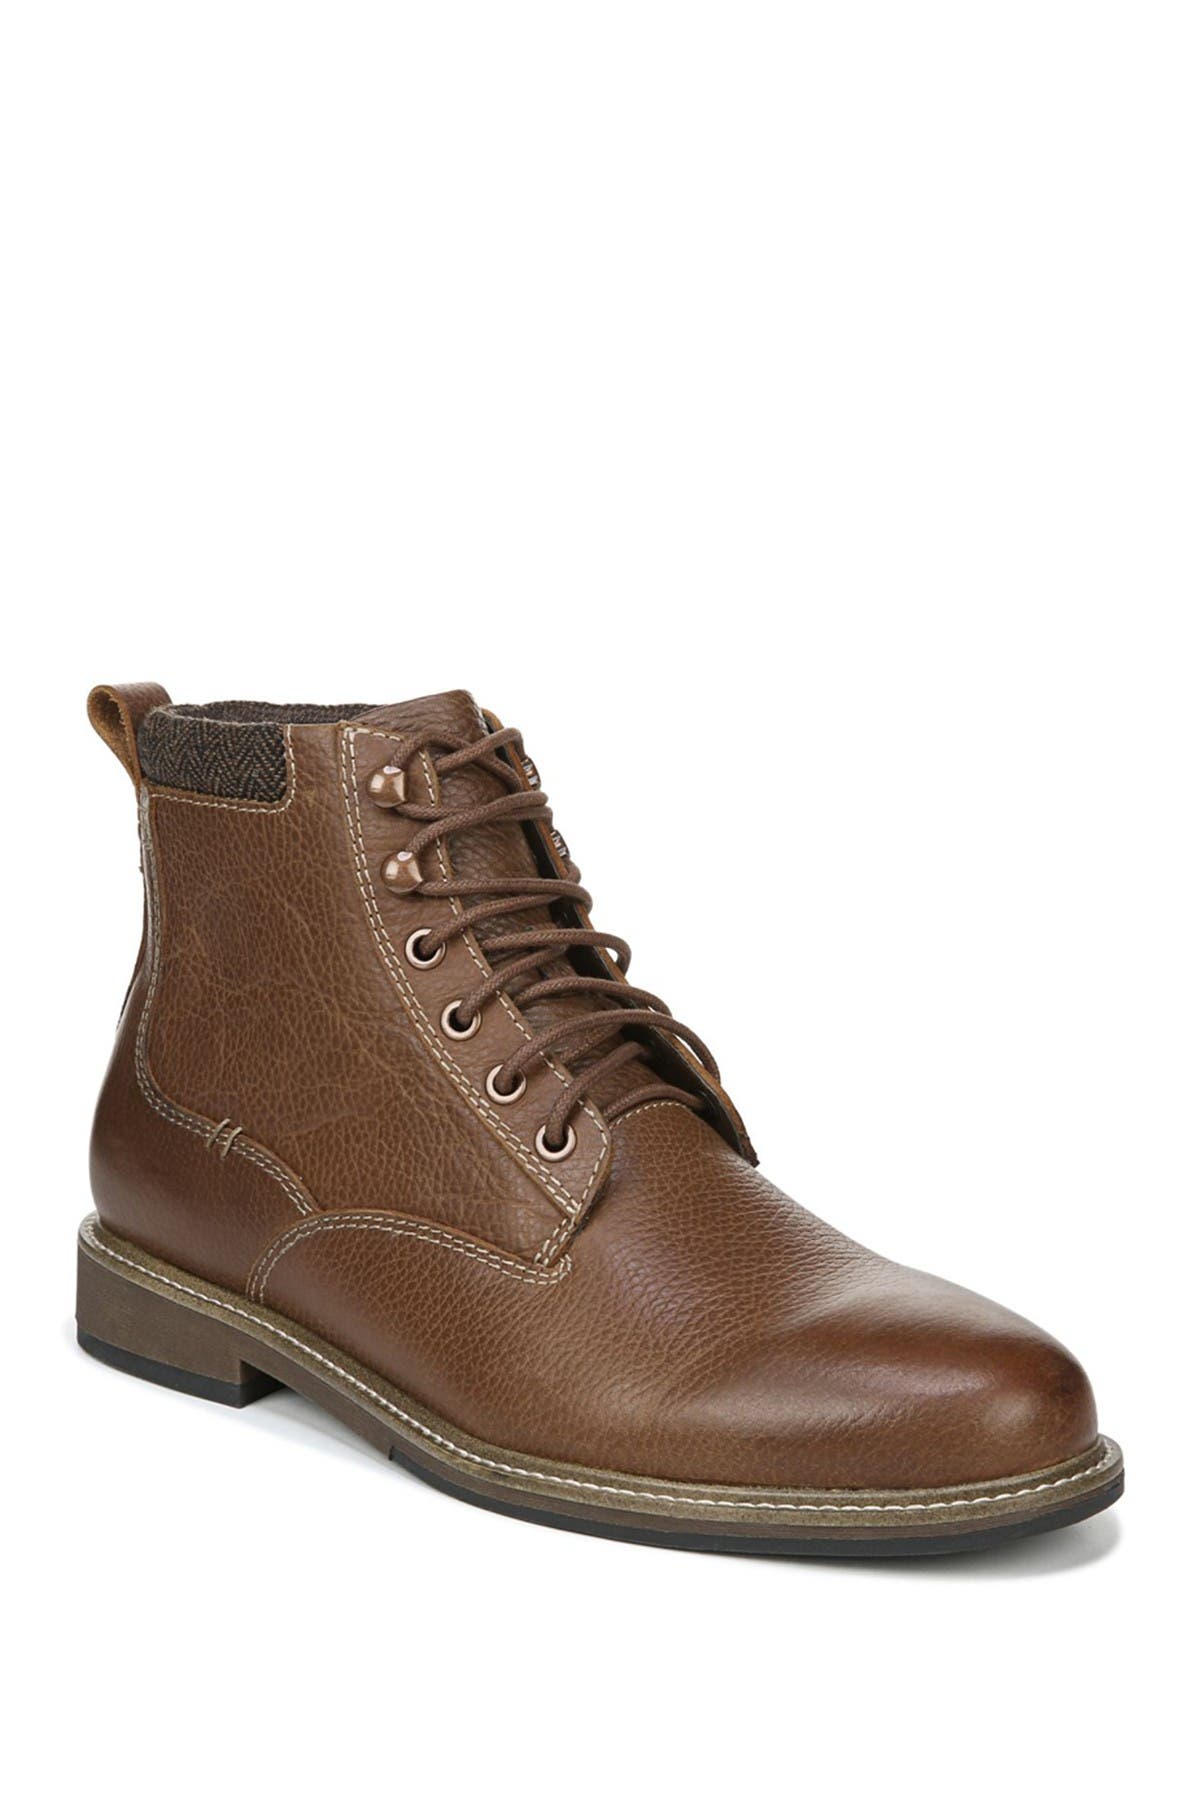 nordstrom rack men's shoes clearance